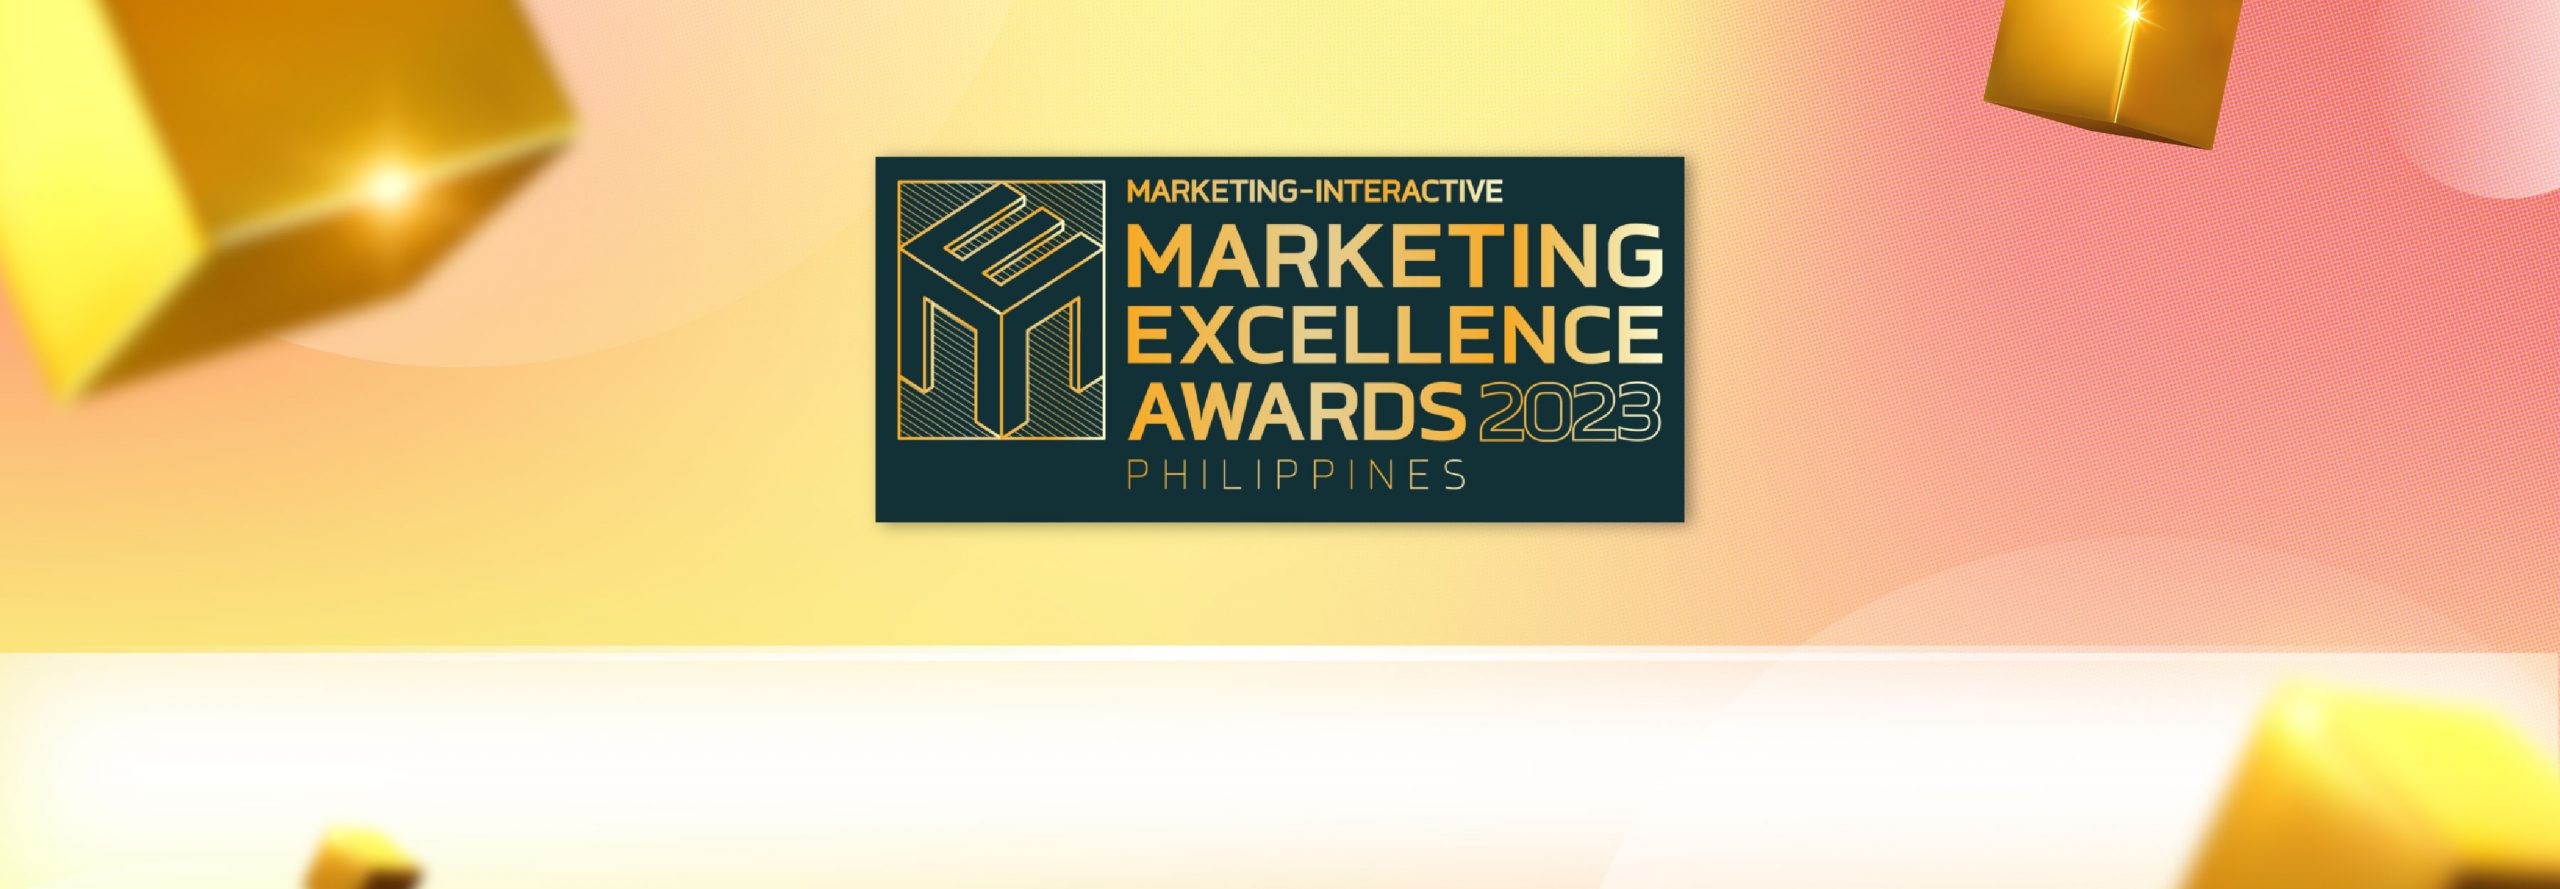 SM Supermalls bags 7 wins at the Marketing Excellence Awards with independent digital agency SVEN